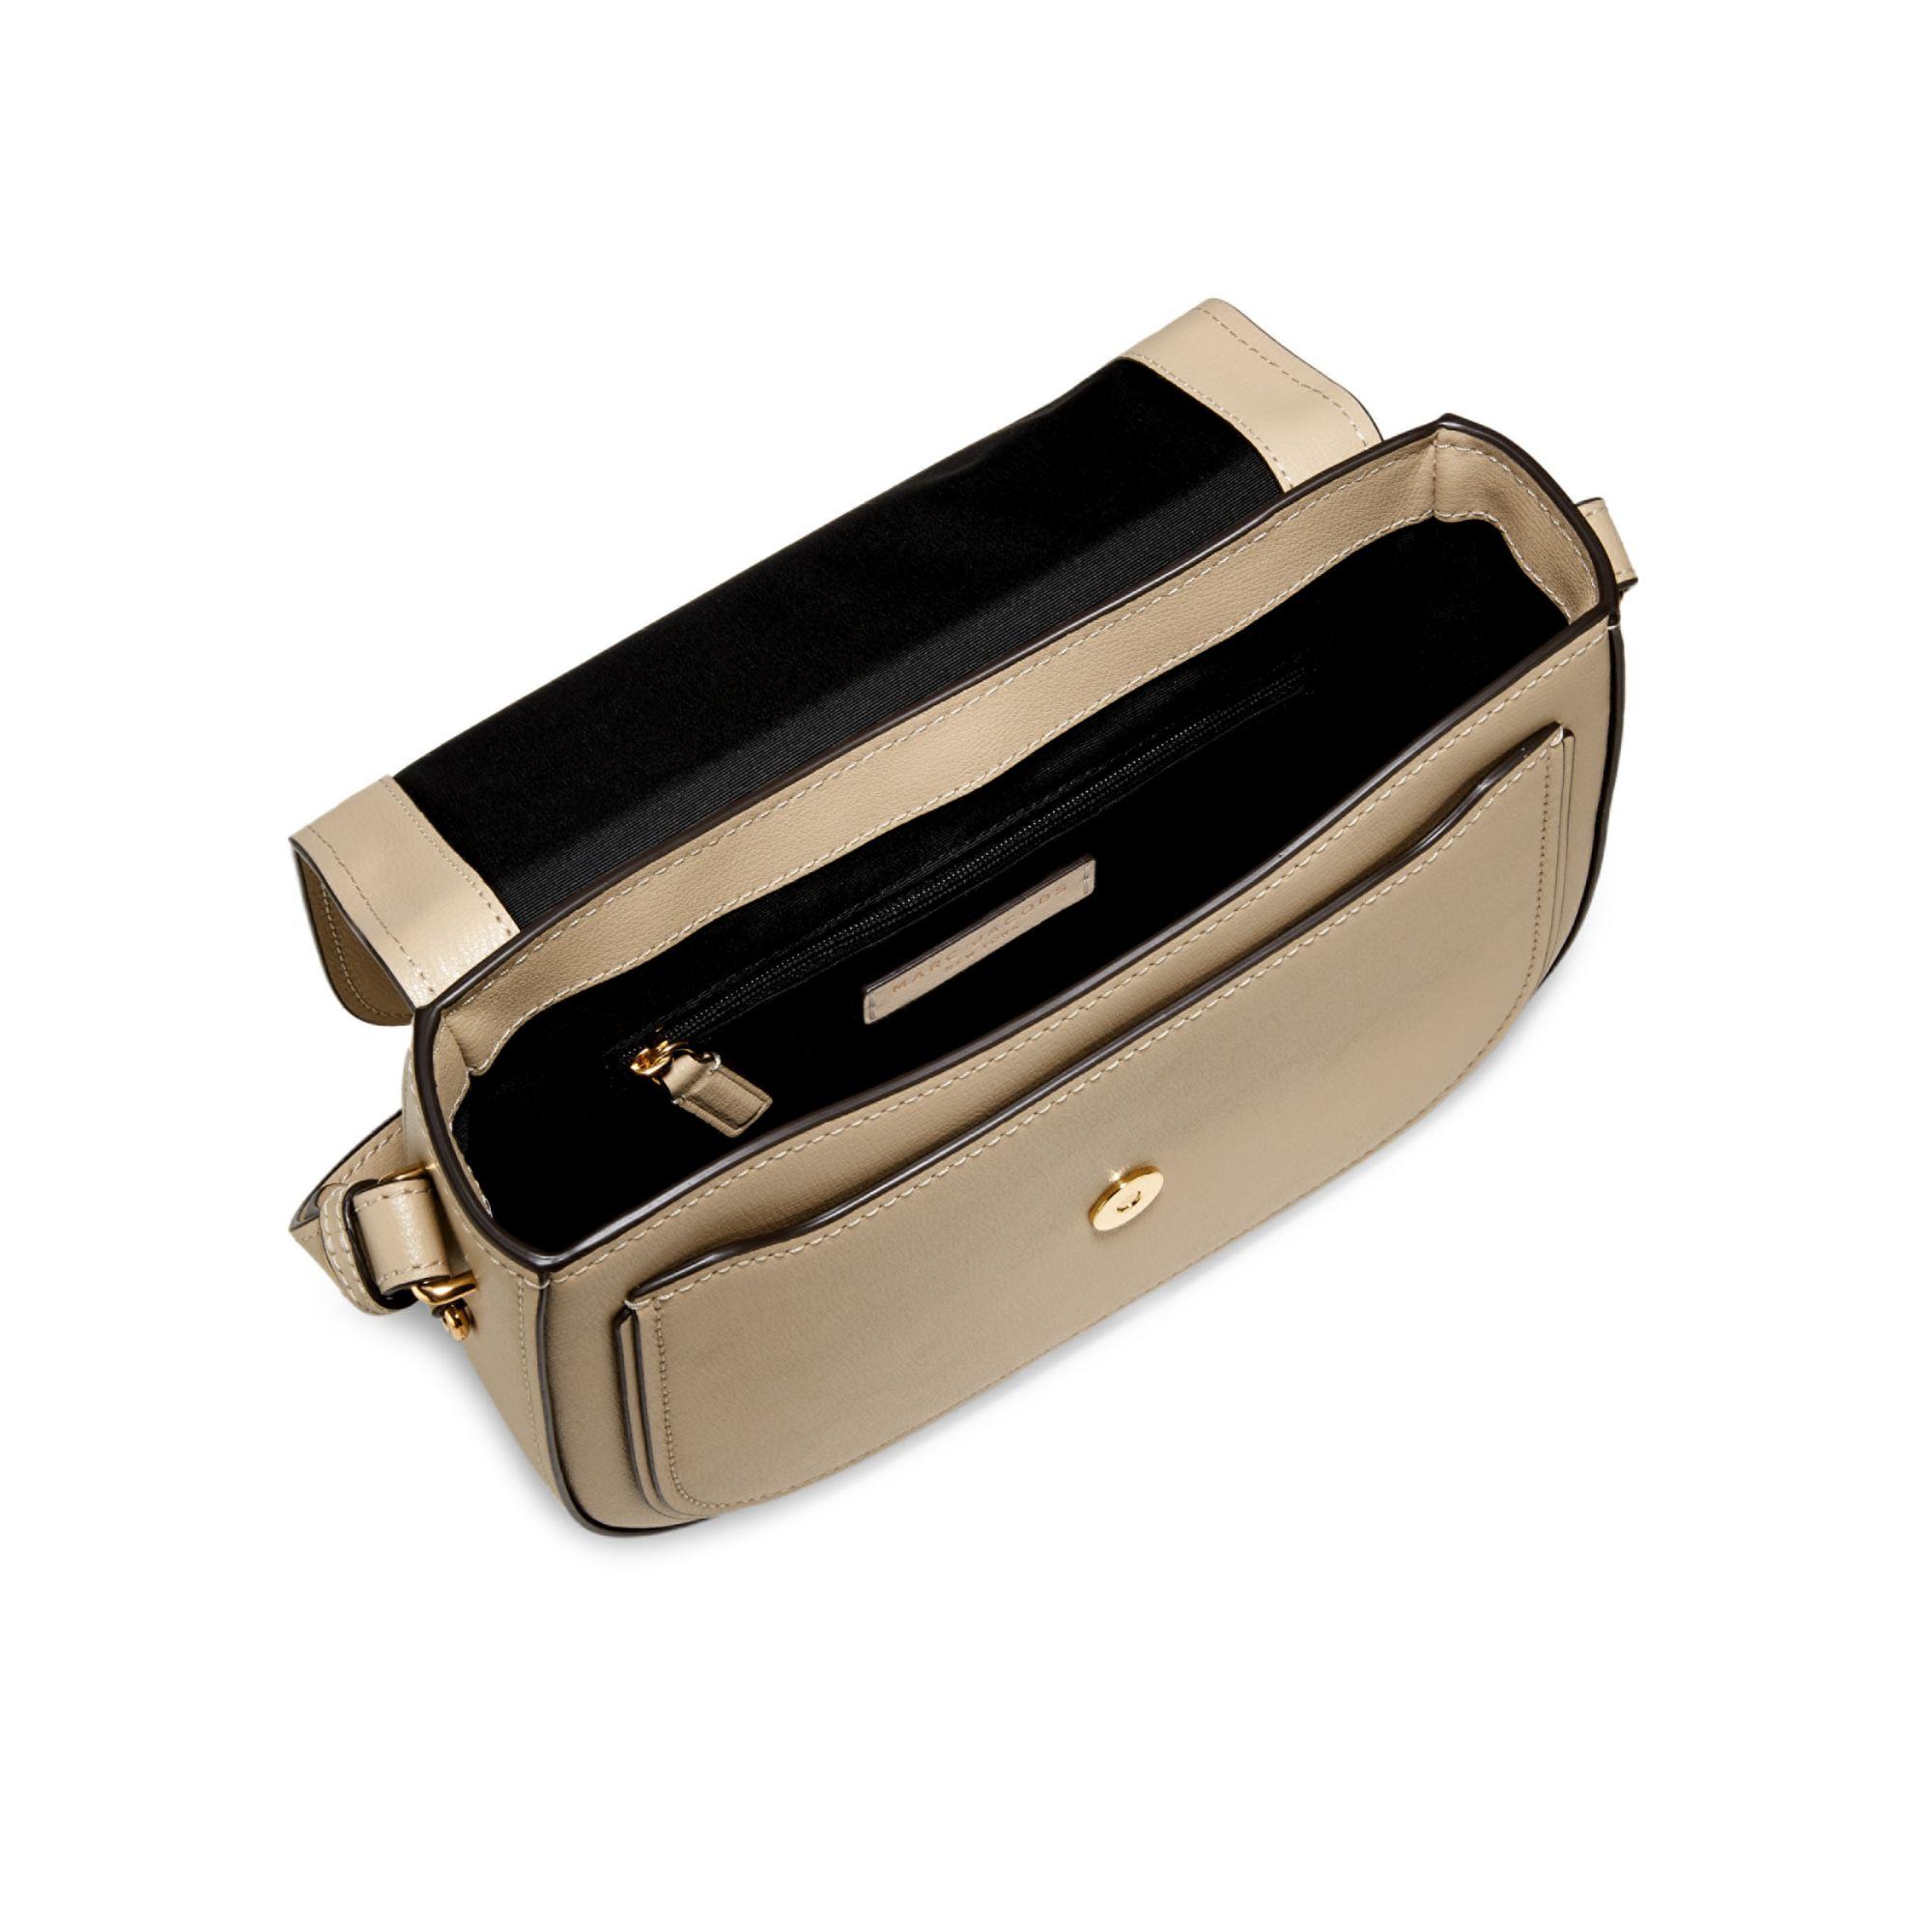 Marc Jacobs Rider Leather Saddle Bag in Black - Lyst